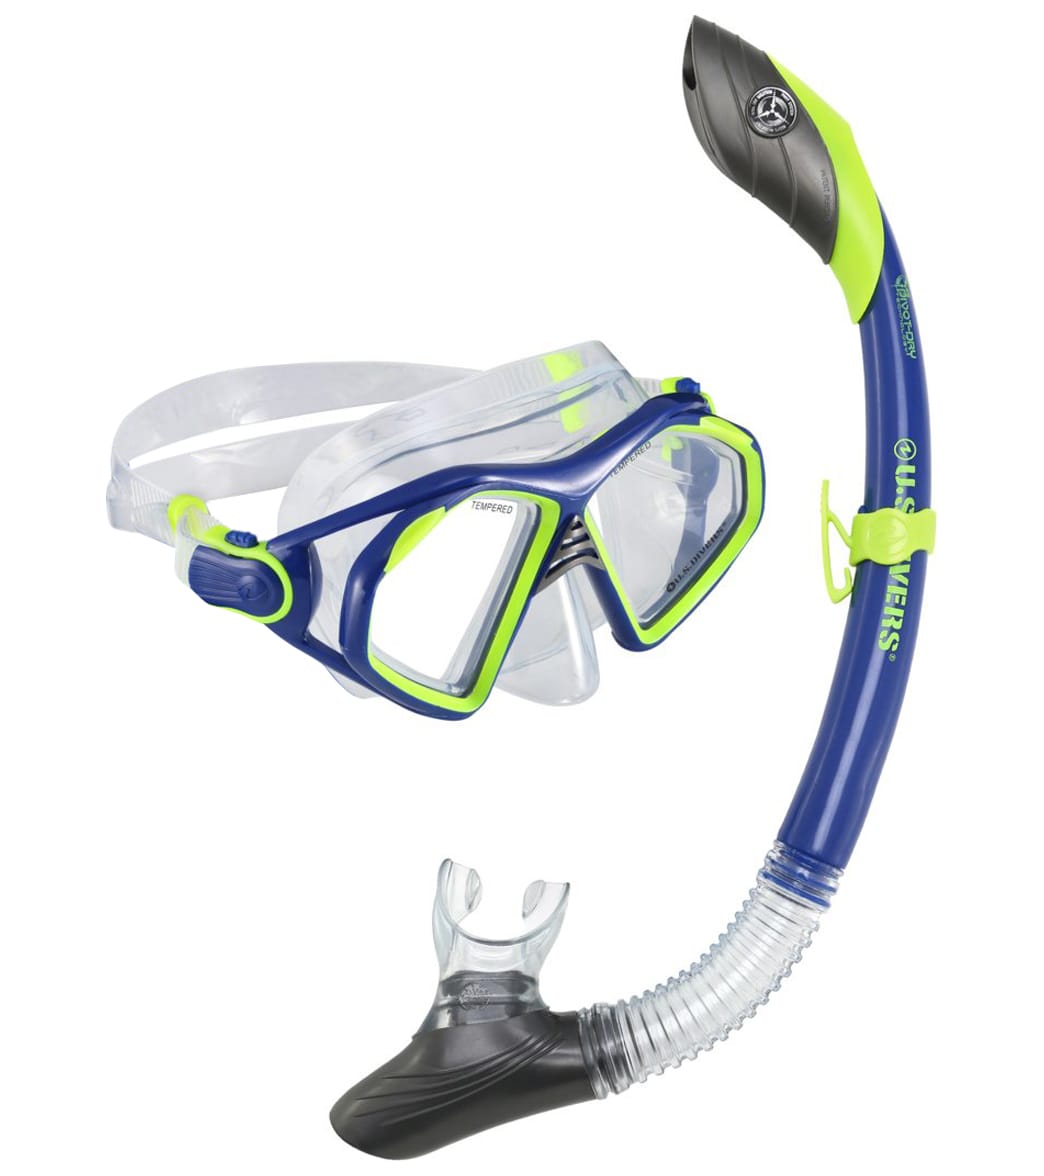 U.s. Divers Admiral 2Lx/Island Dry Mask And Snorkel Set - Blue/Neon Silicone - Swimoutlet.com